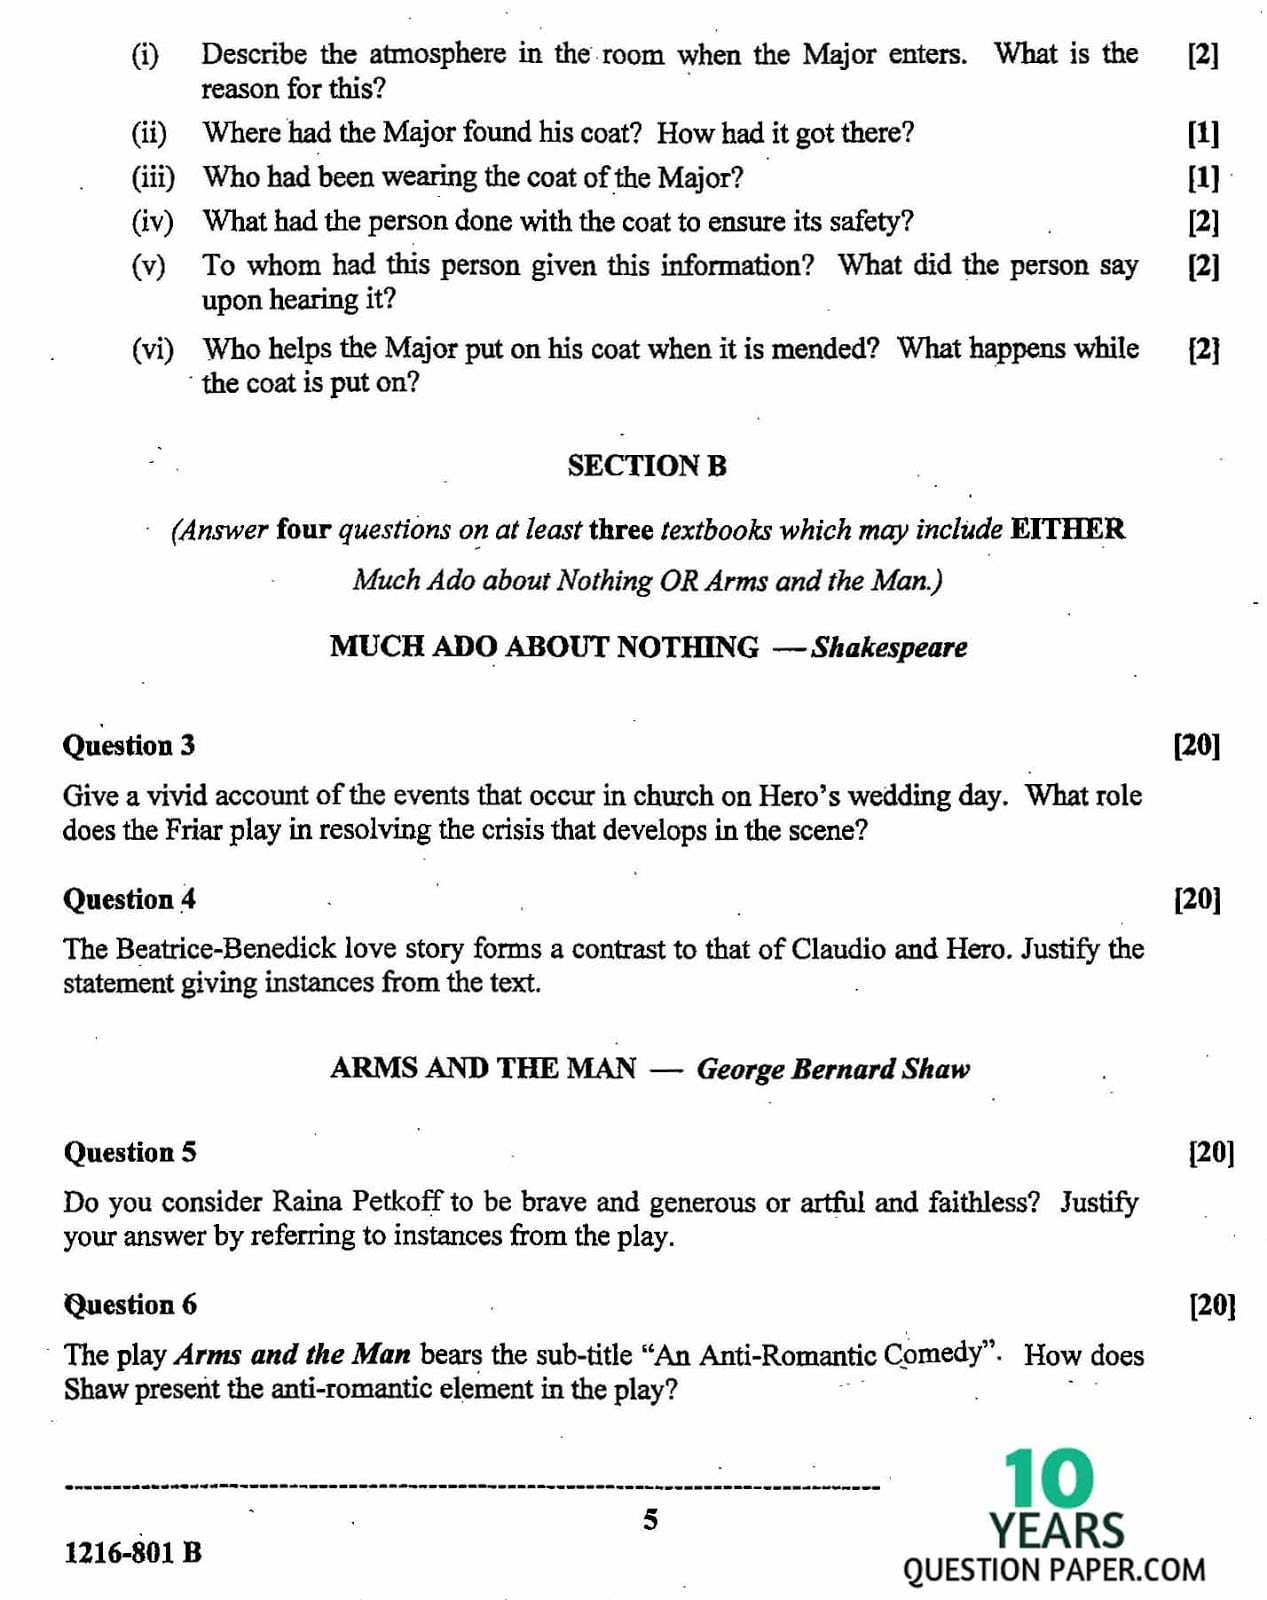 ISC Class 12 English Literature 2016 Question Paper